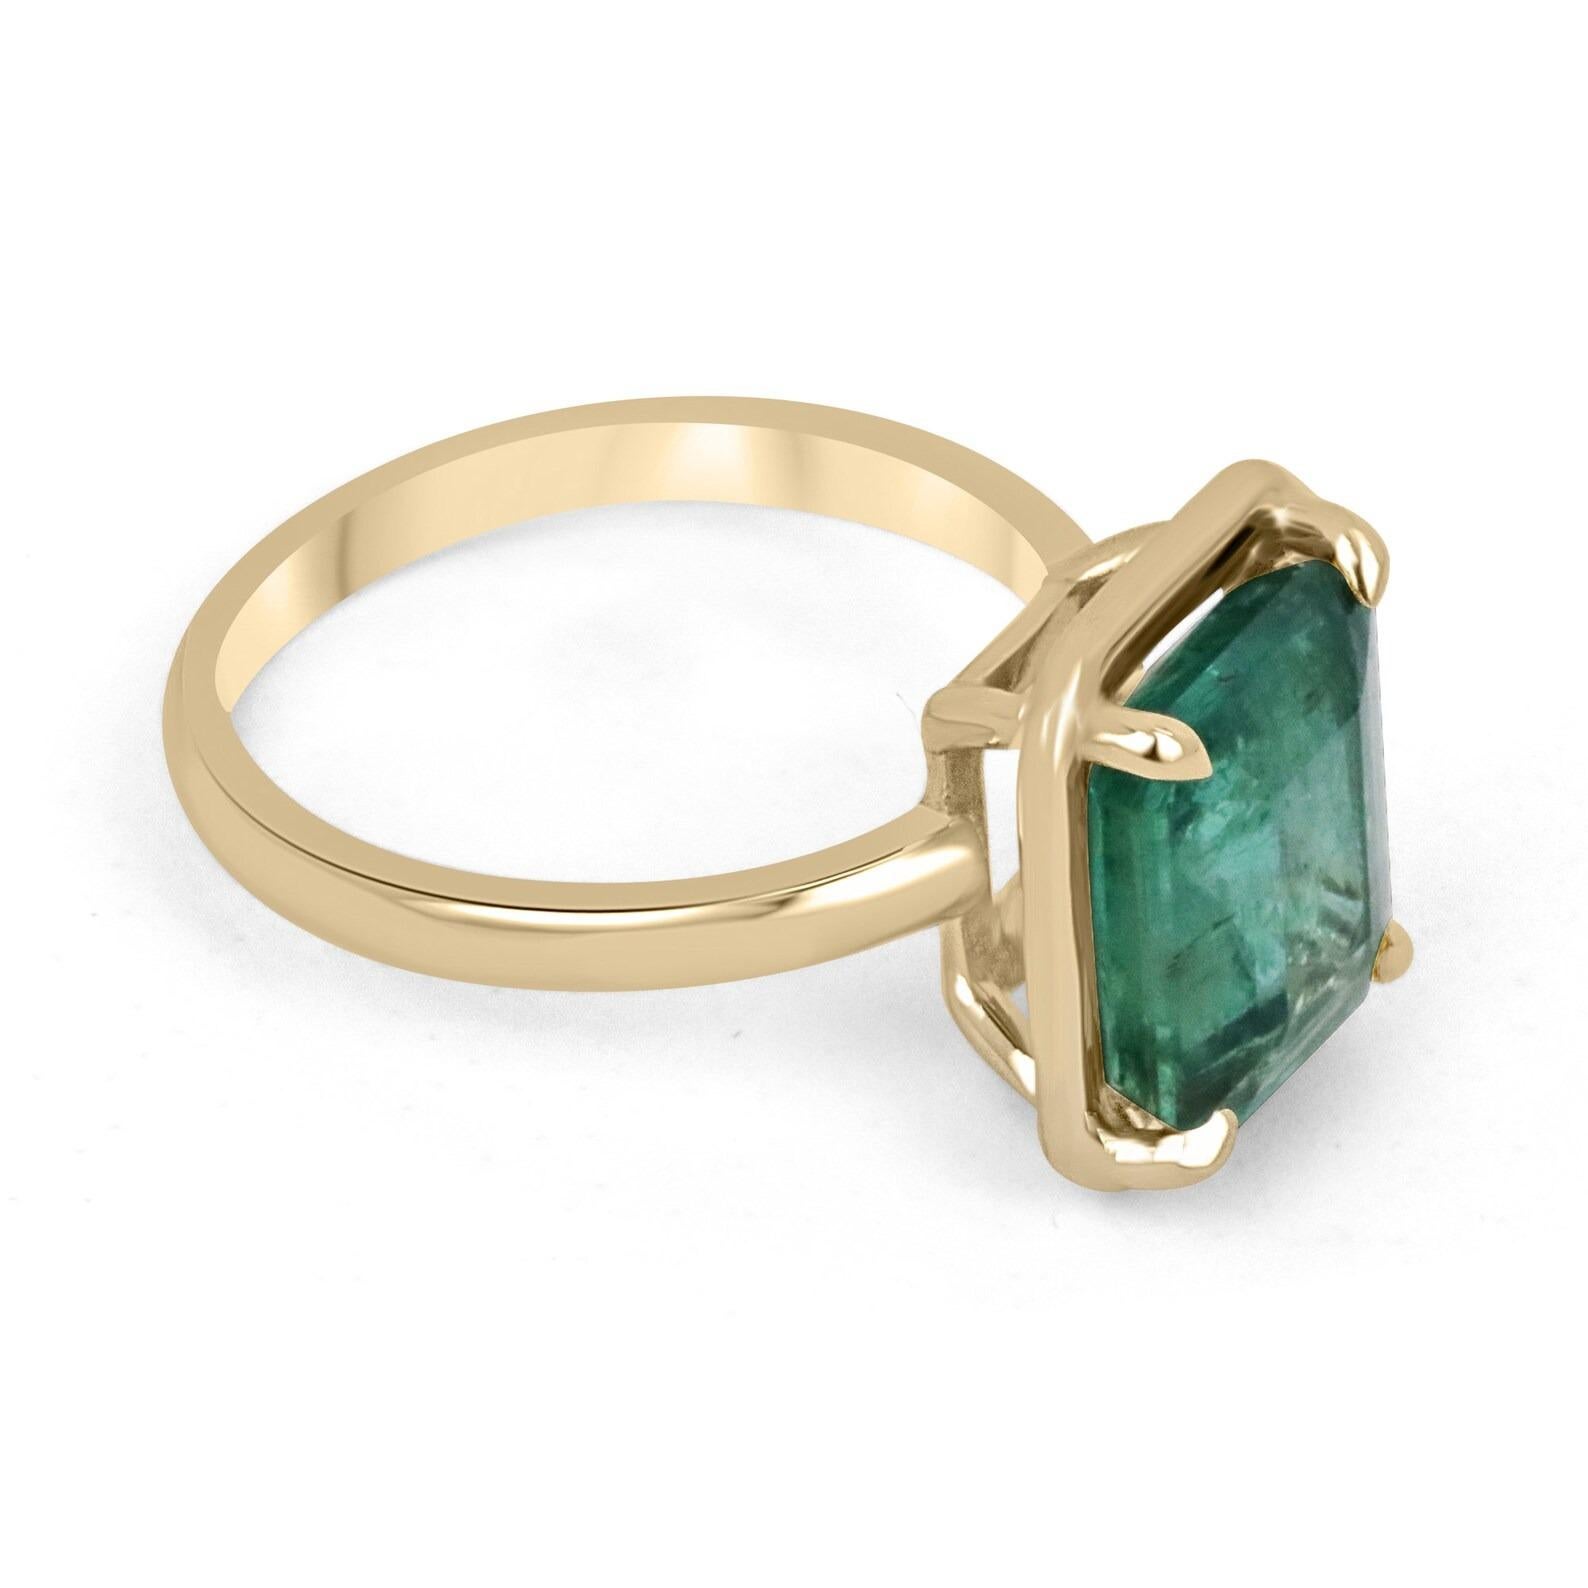 Displayed is a classic emerald solitaire engagement or right-hand ring. This spectacular piece features a remarkable 4.35-carat, natural emerald cut emerald from the origins of Zambia. The center stone showcases a mossy medium-green color that